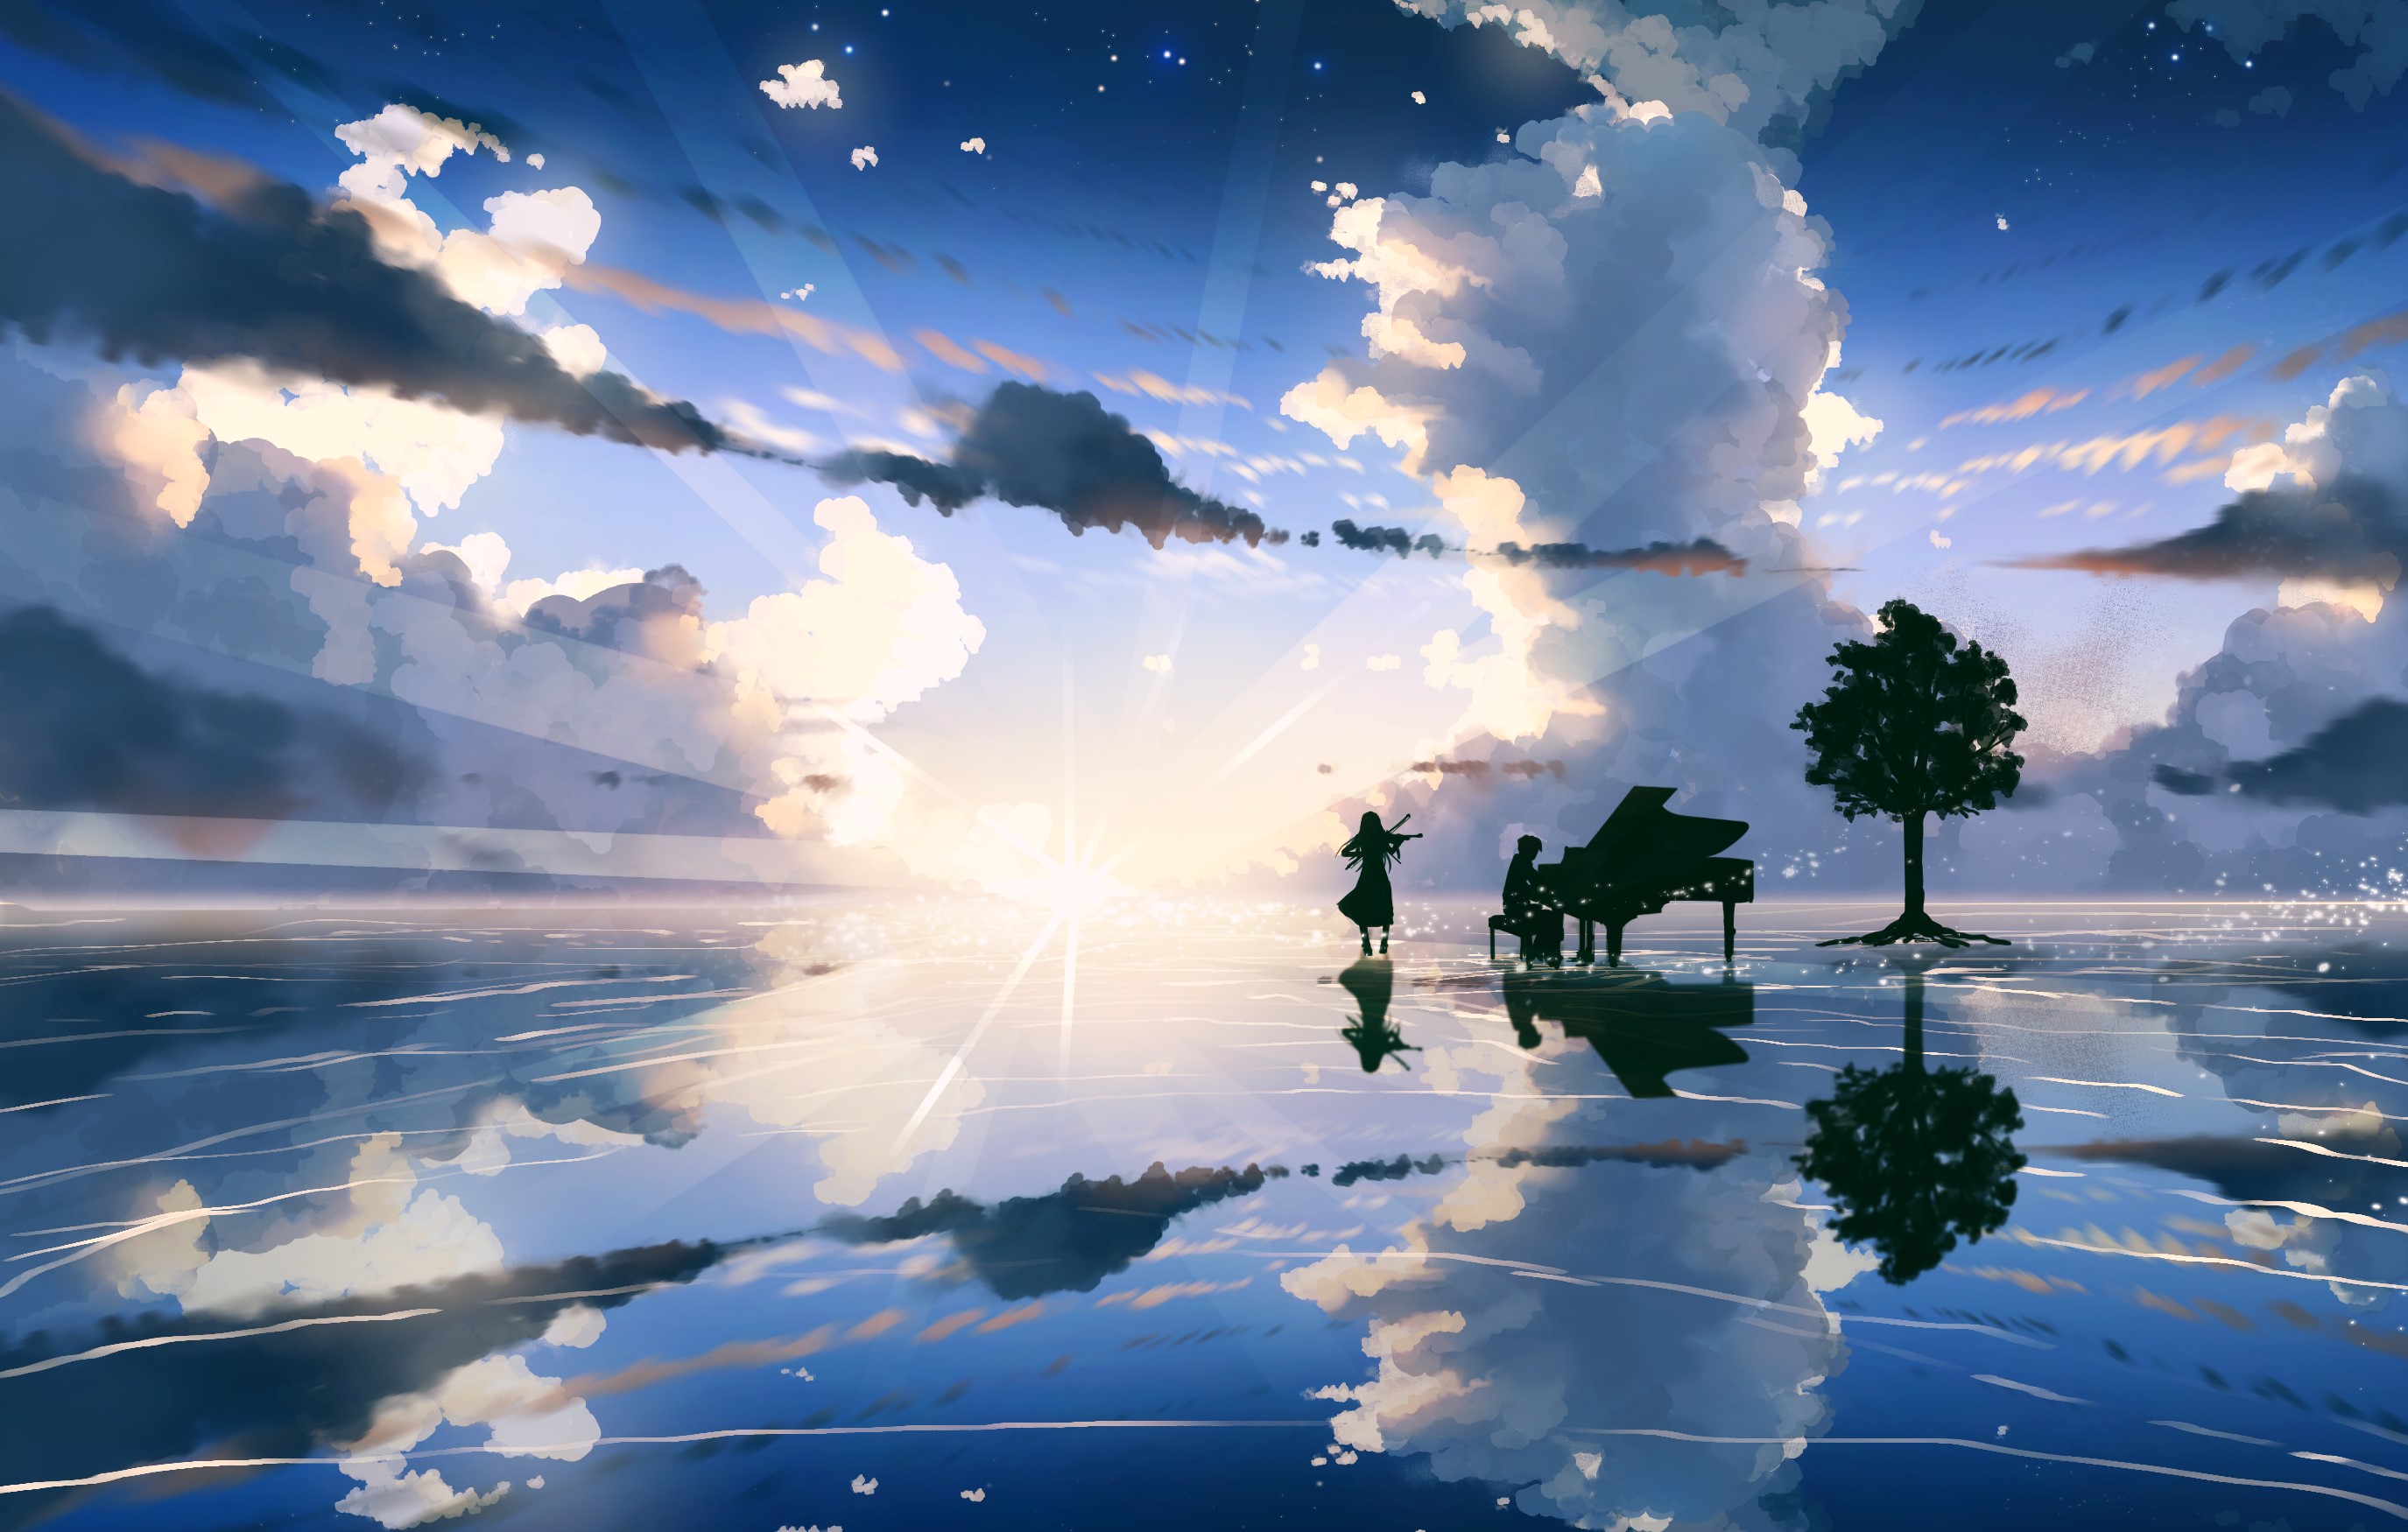 Full HD 1080p your lie in april wallpaper free download